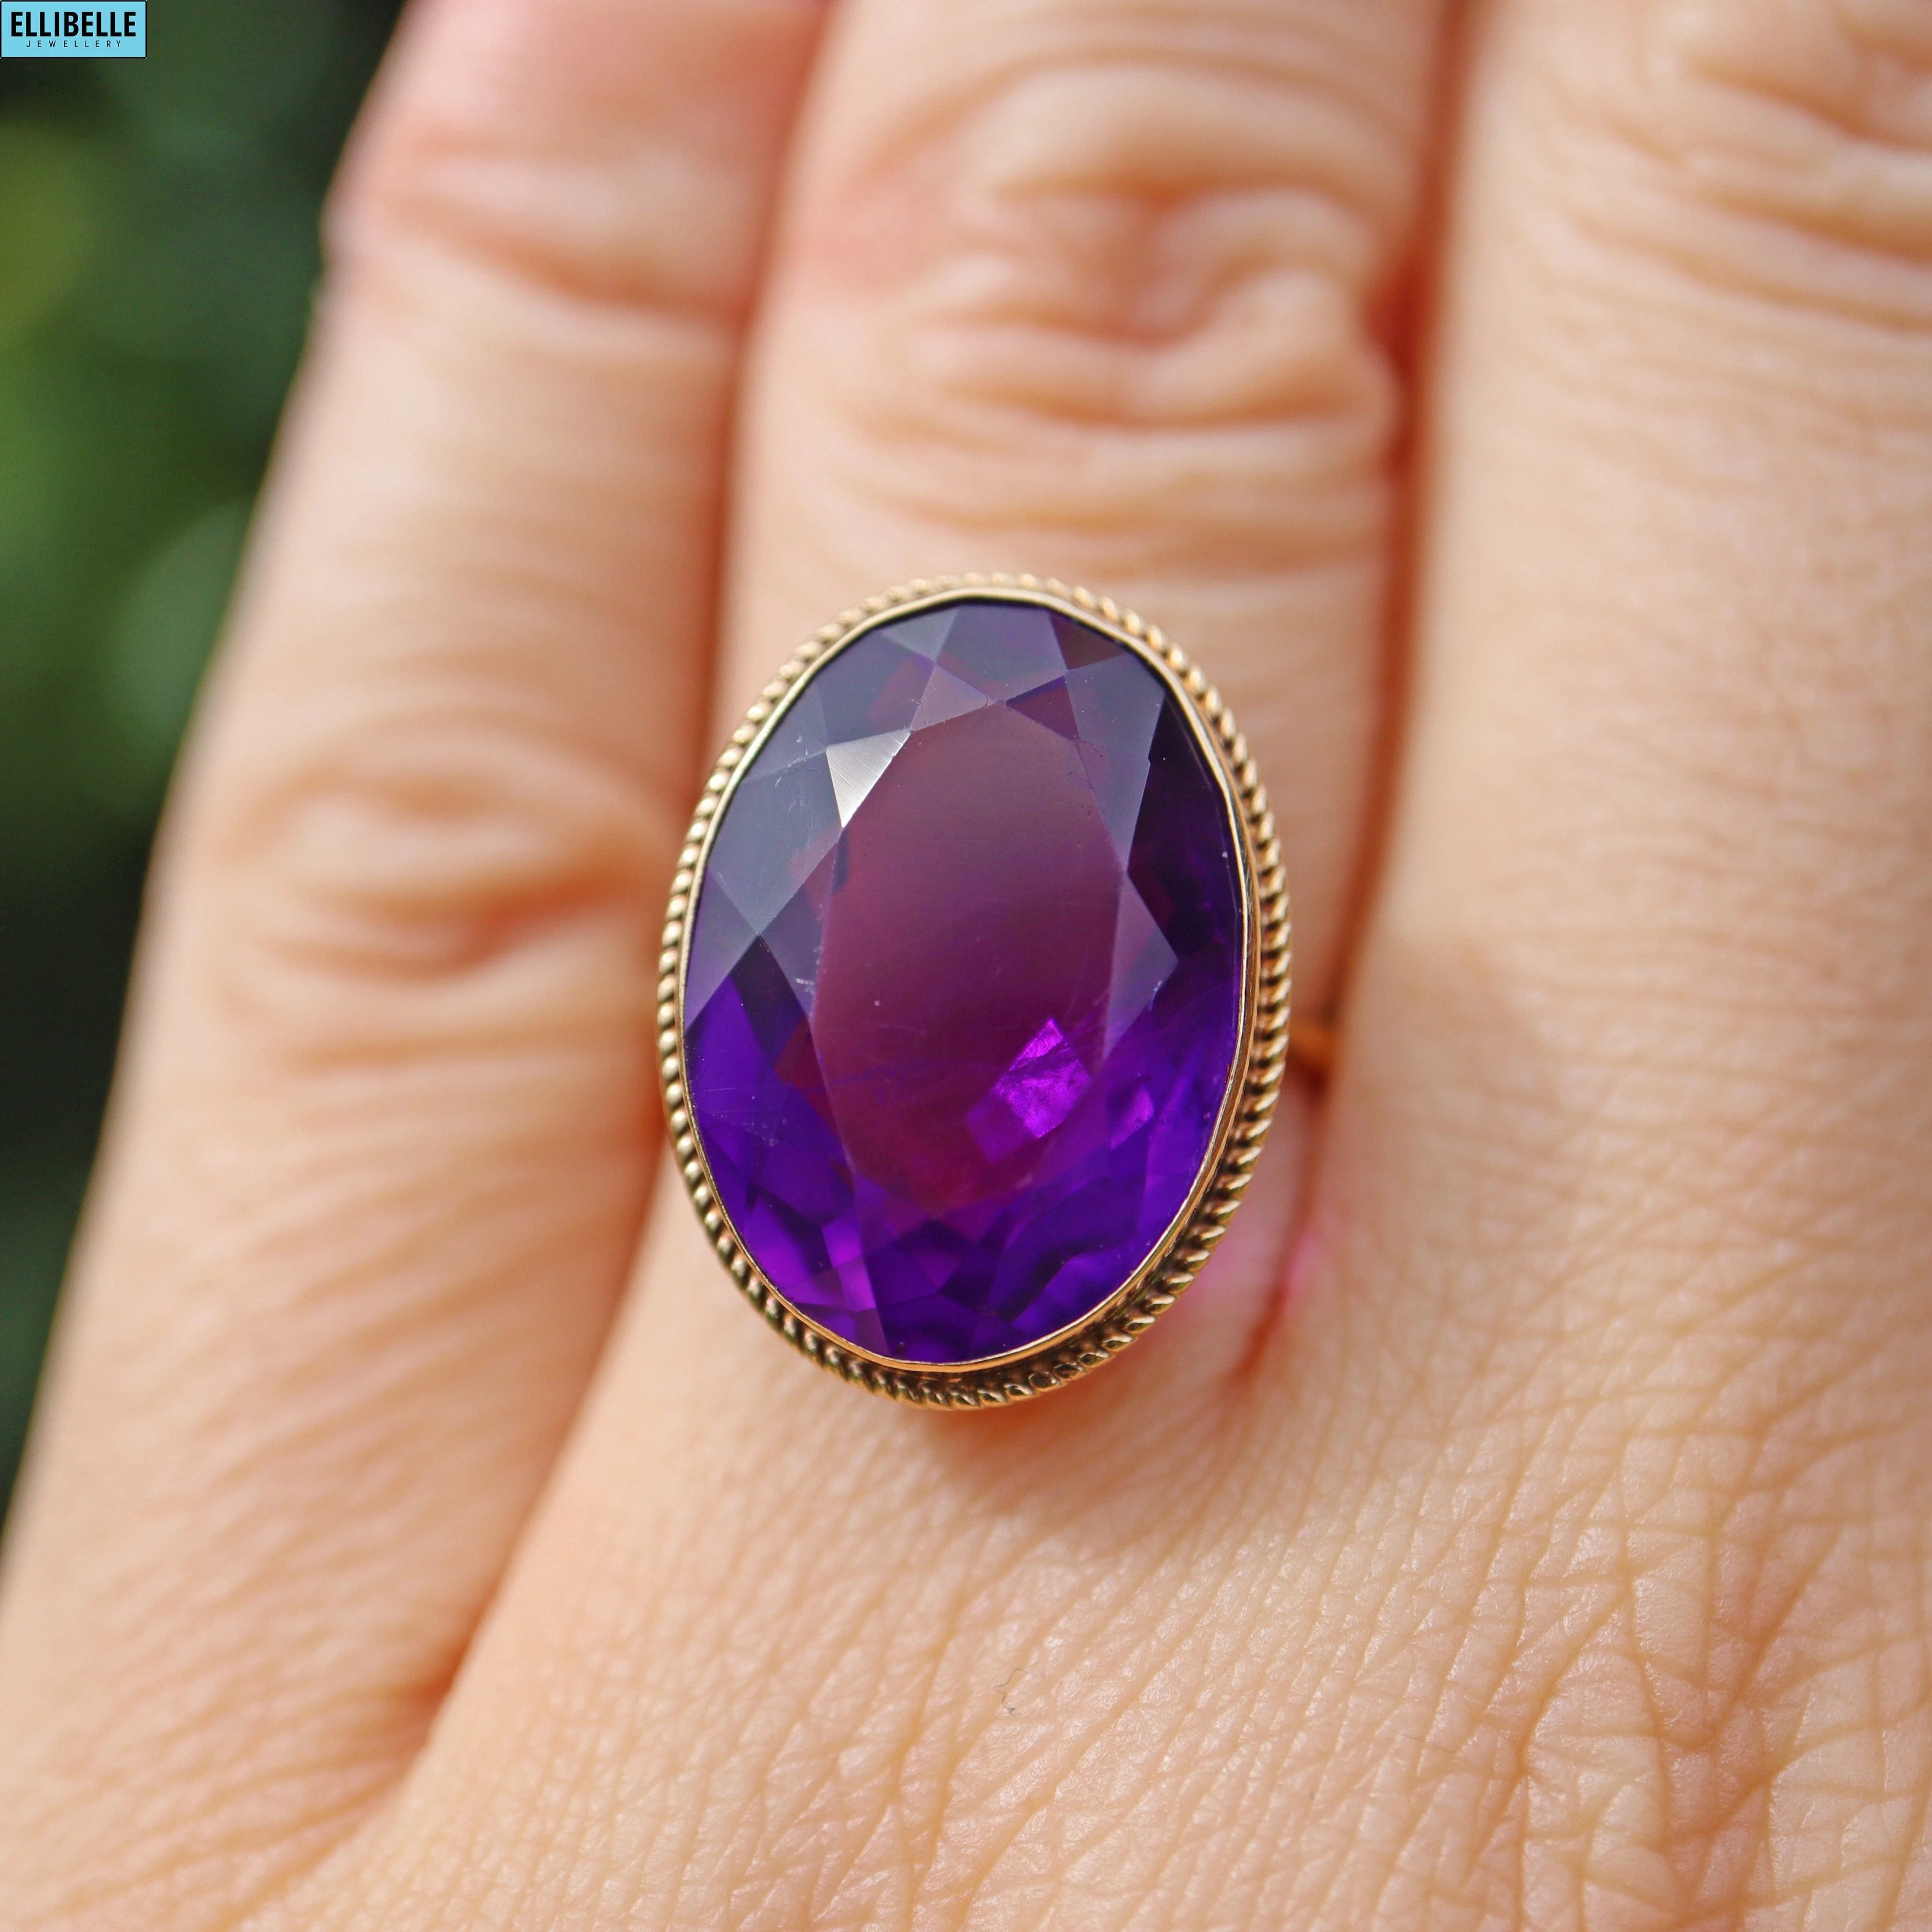 VINTAGE AMETHYST 9CT GOLD SOLITAIRE DRESS RING